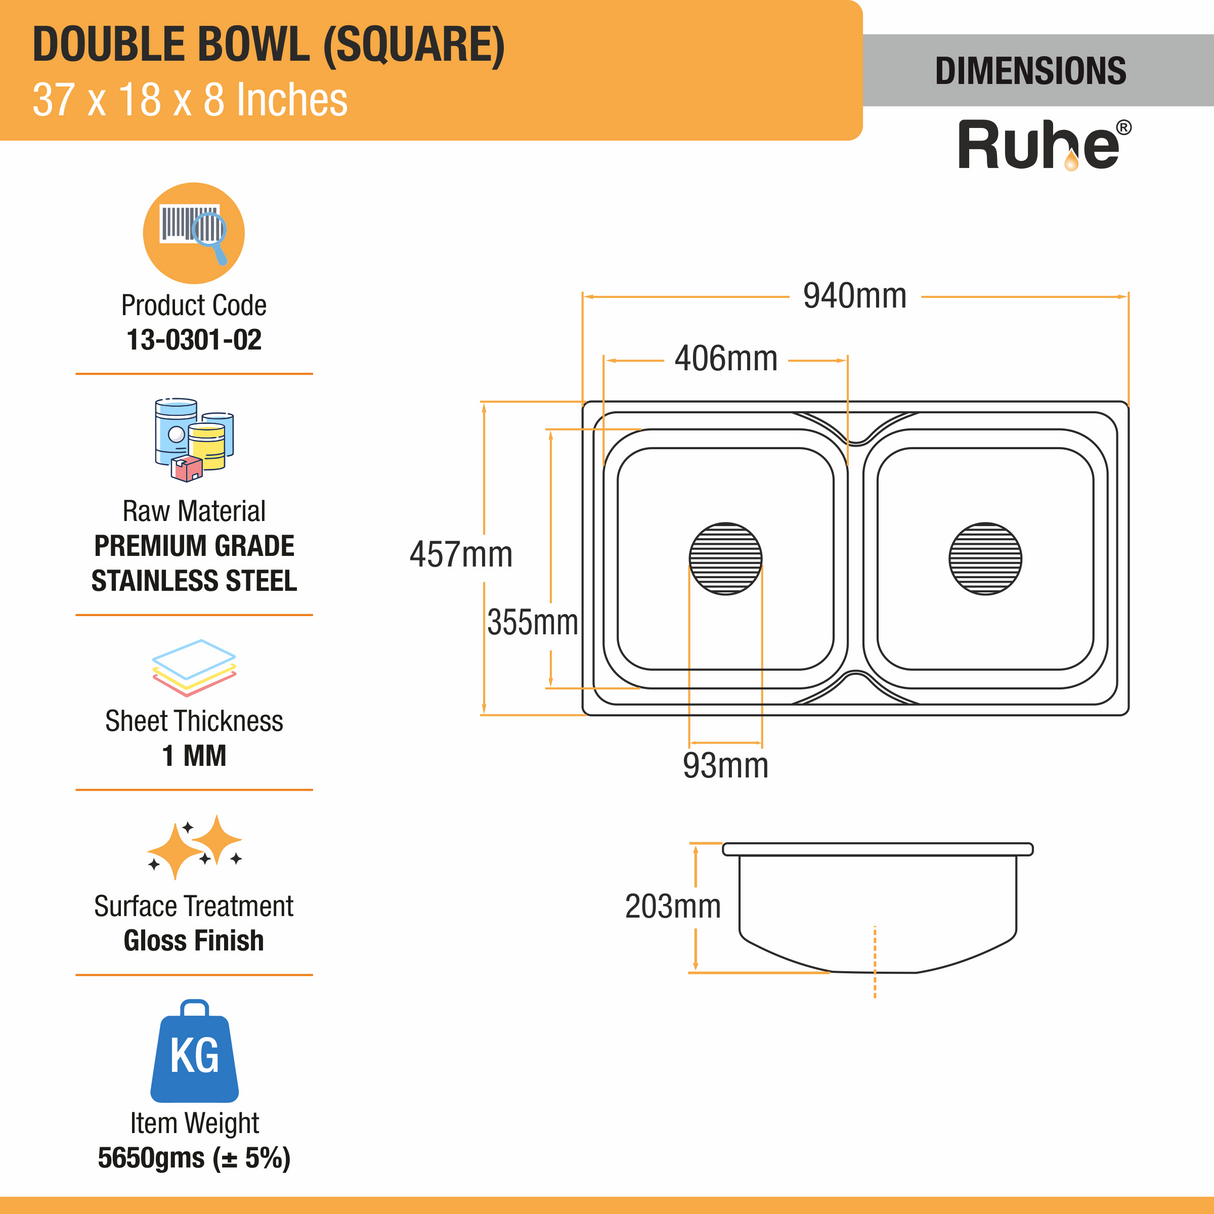 Square Double Bowl Premium Stainless Steel Kitchen Sink (37 x 18 x 8 inches) dimensions and sizes